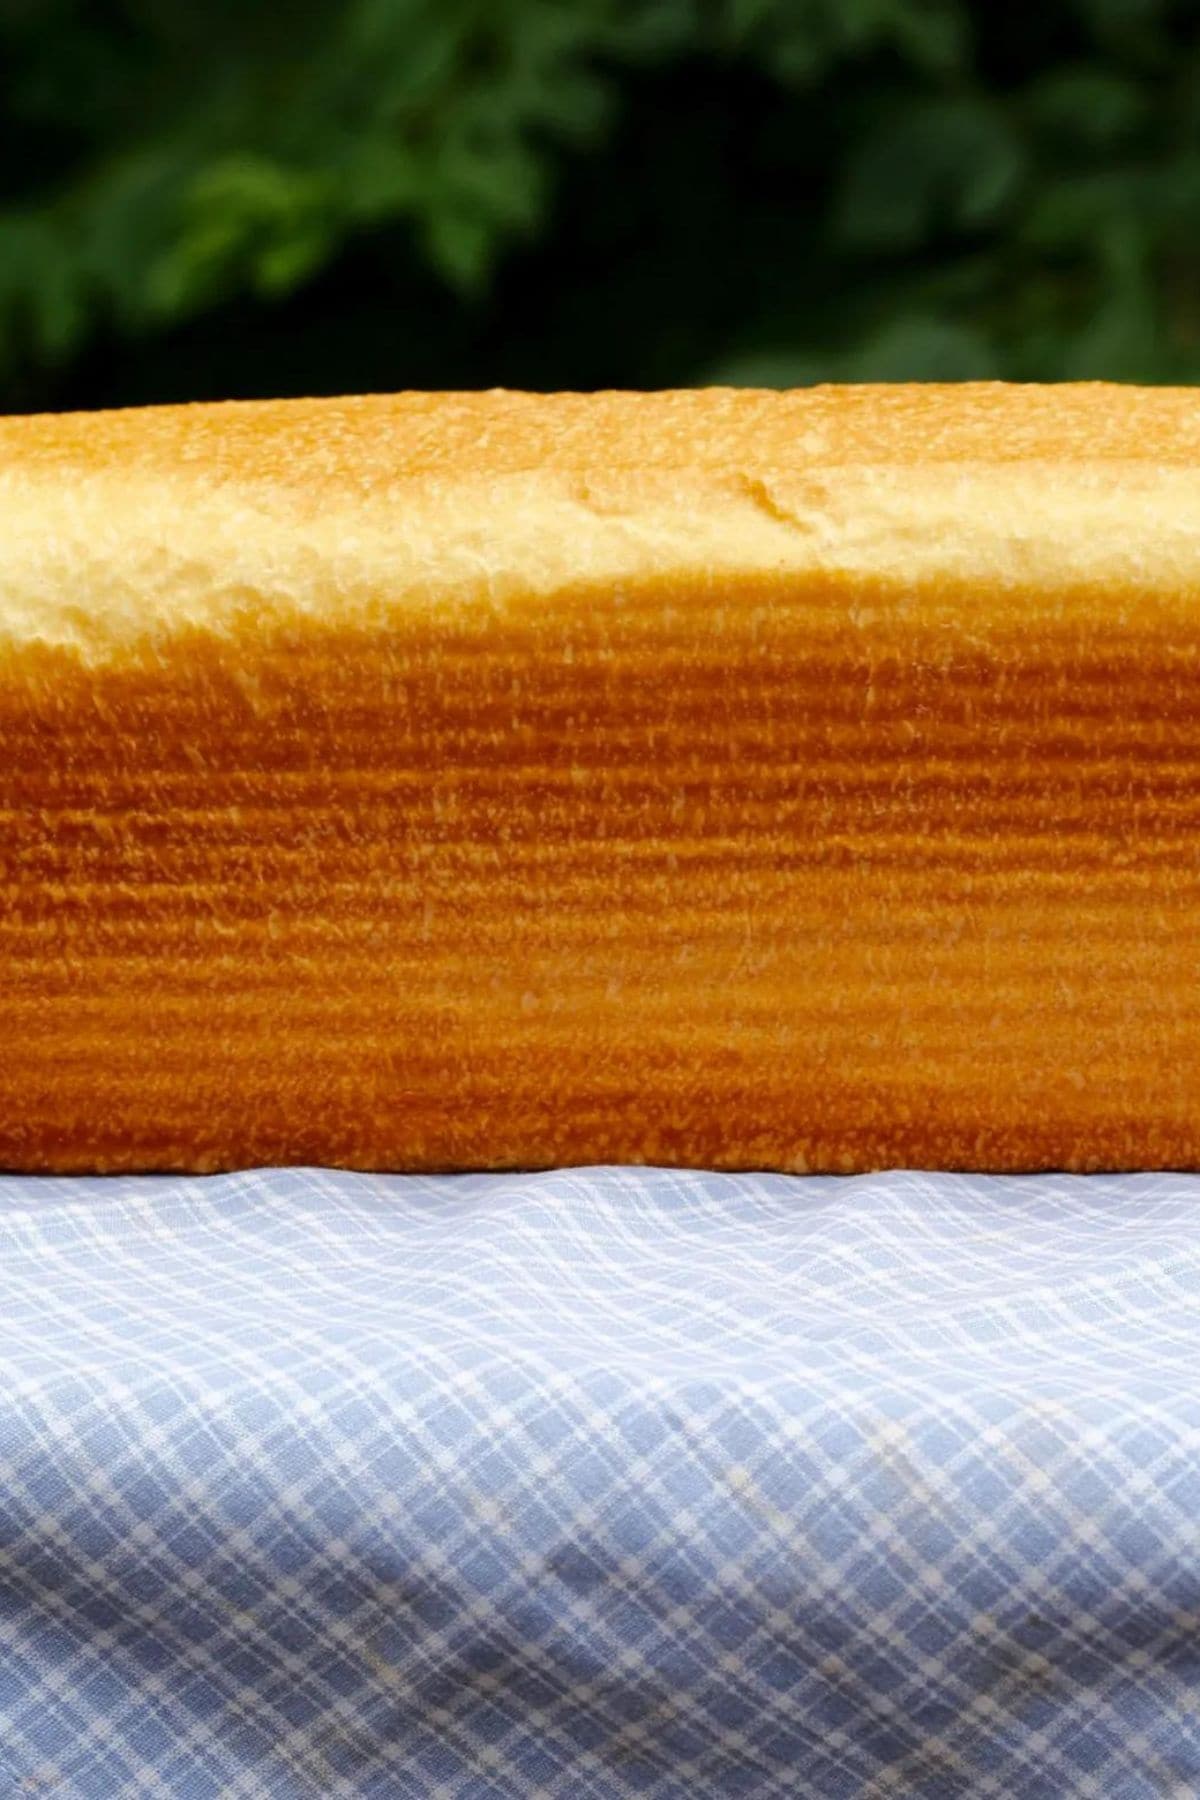 Large loaf of homemade white bread, uncut, sitting on a blue and white checked linen.